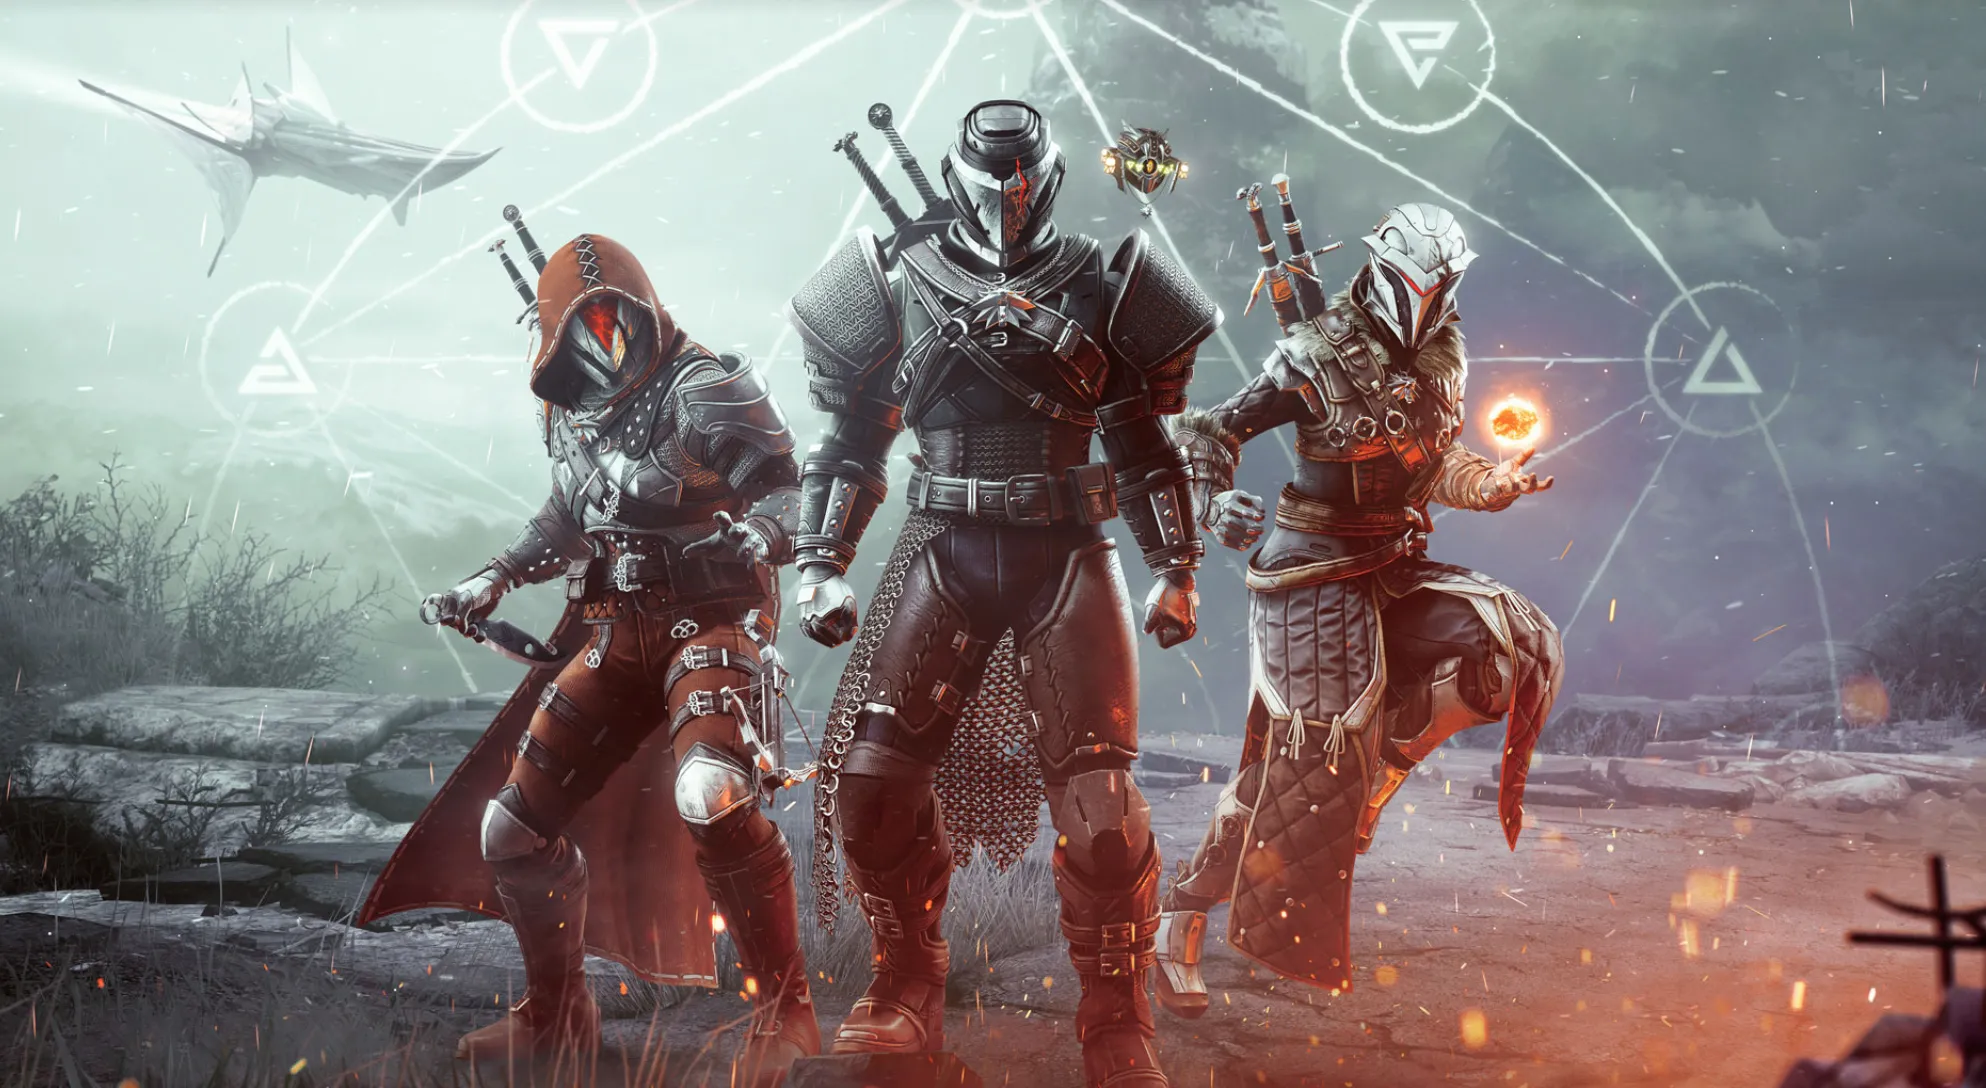 No New Exotic Armor in Destiny 2? Season of the Wish (S23) Disappoints